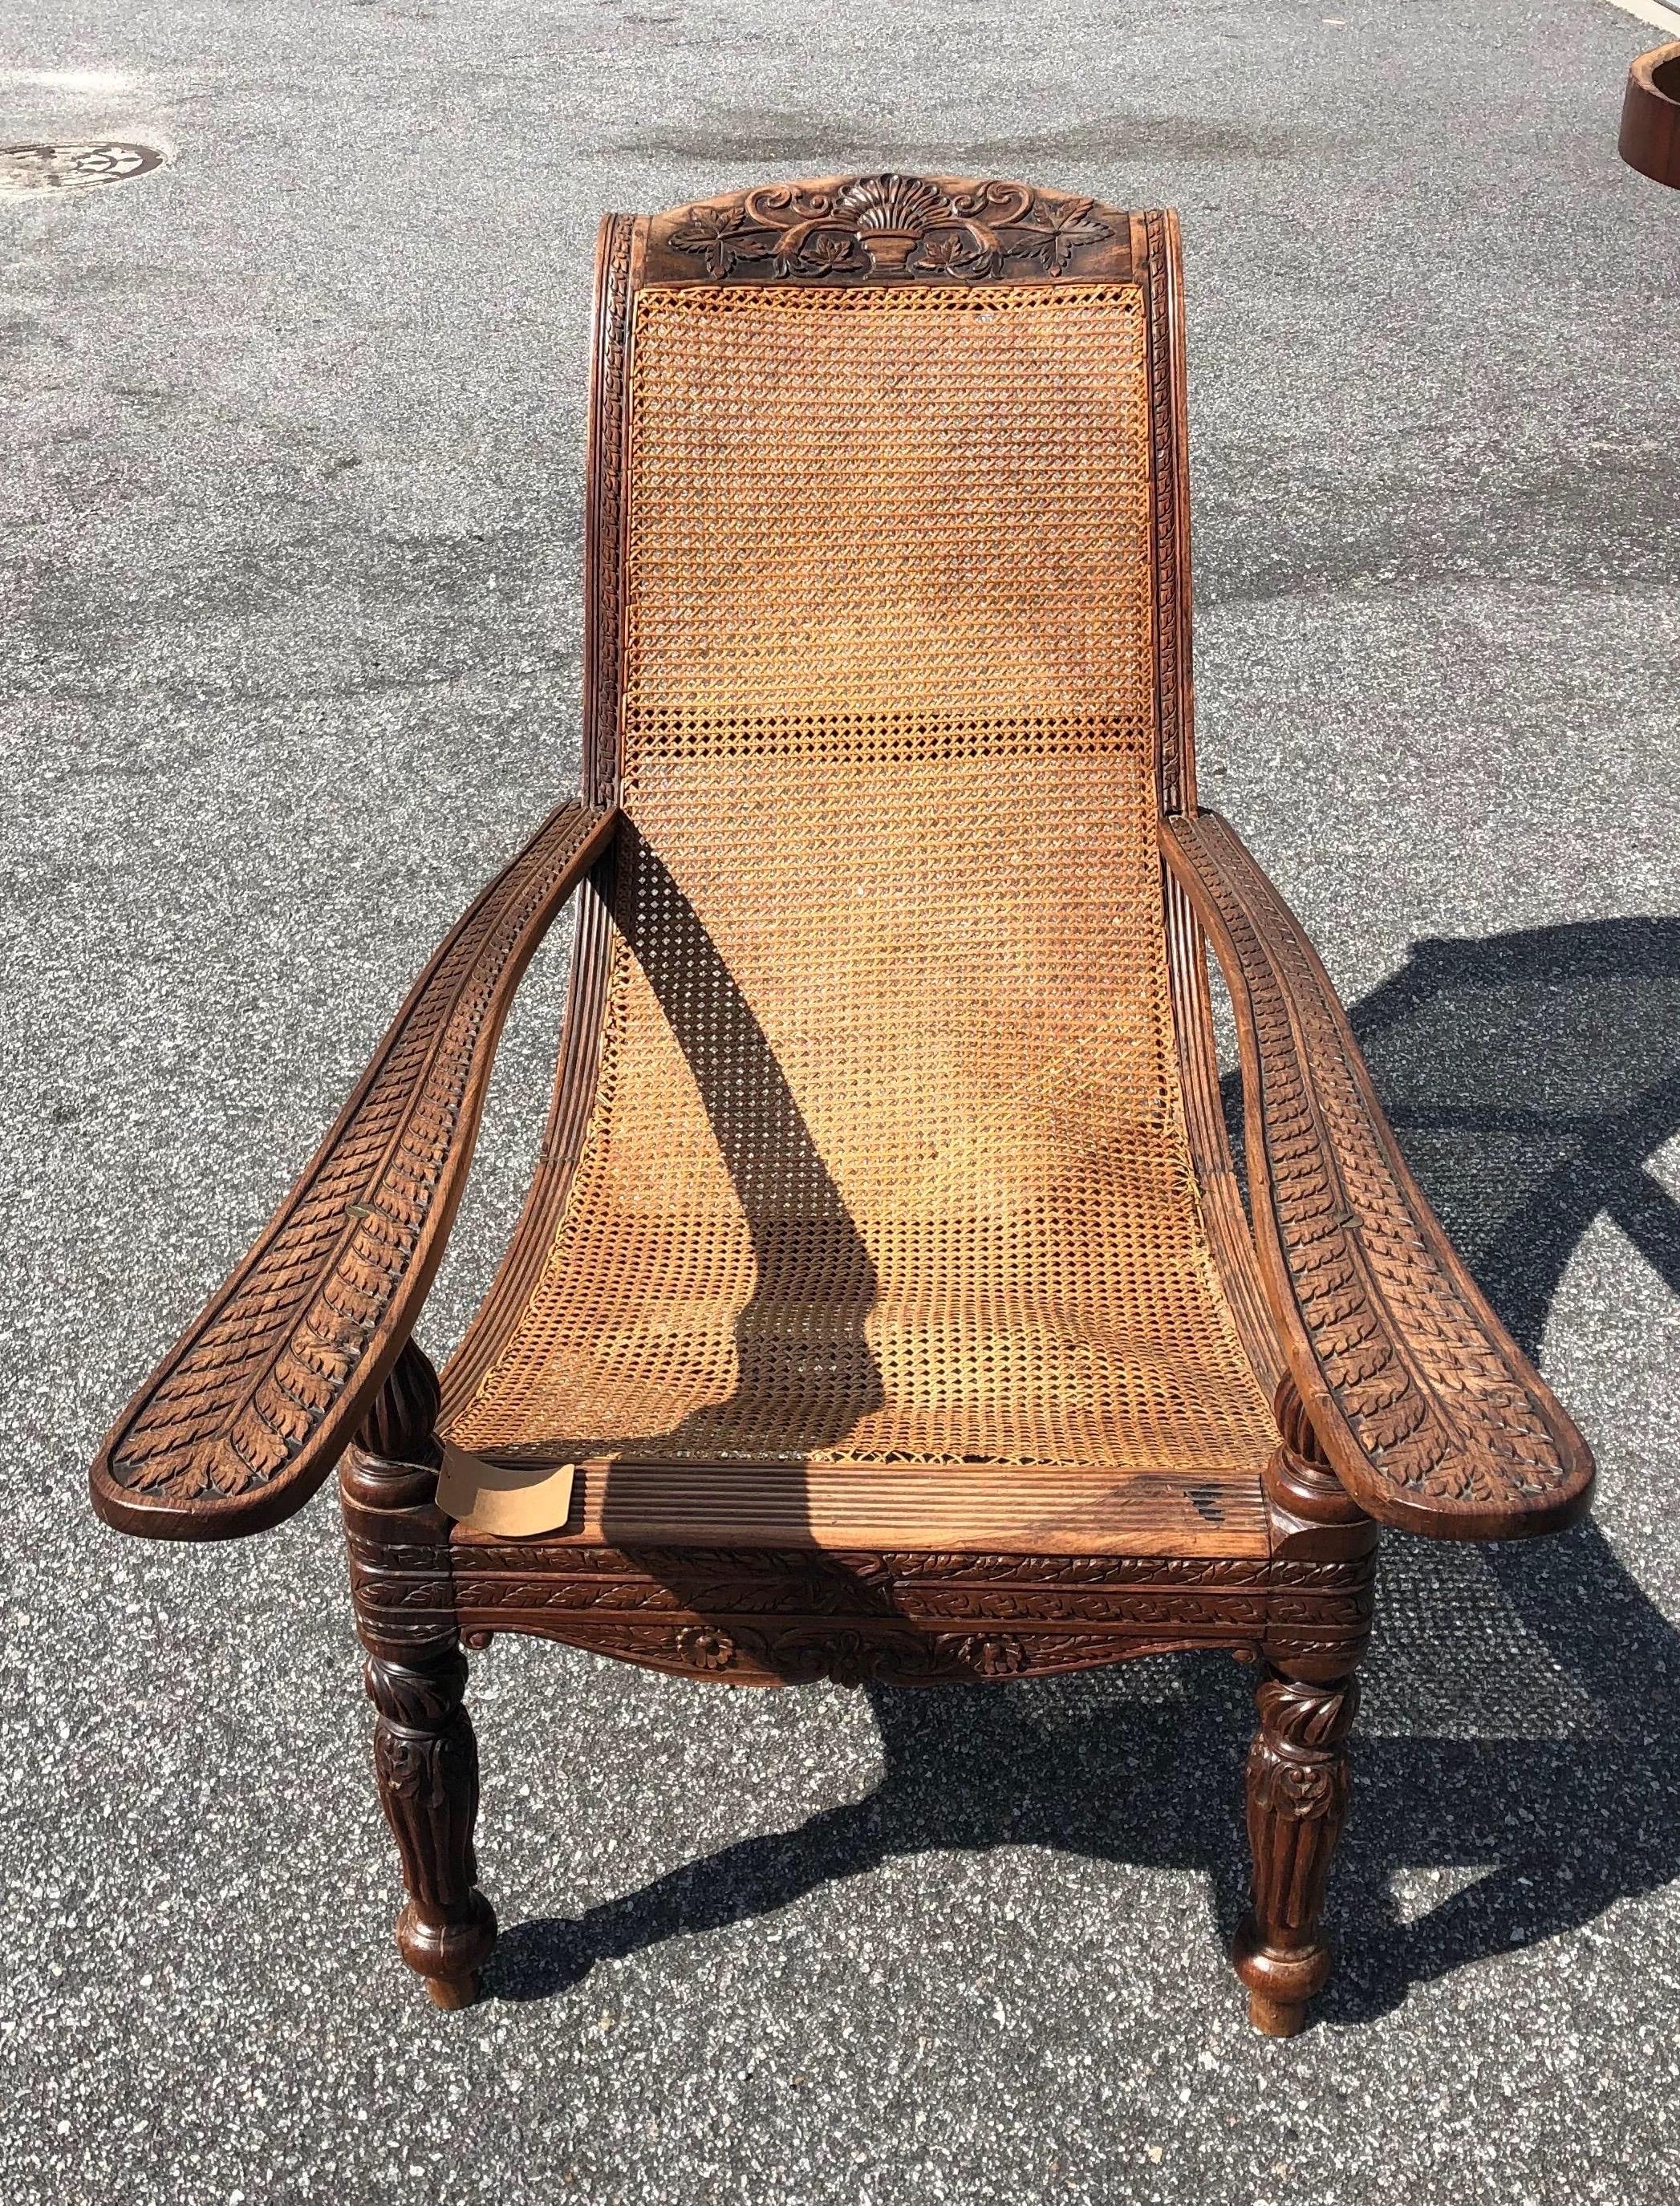 Beautifully carved 19th century West Indies rosewood plantation chair.